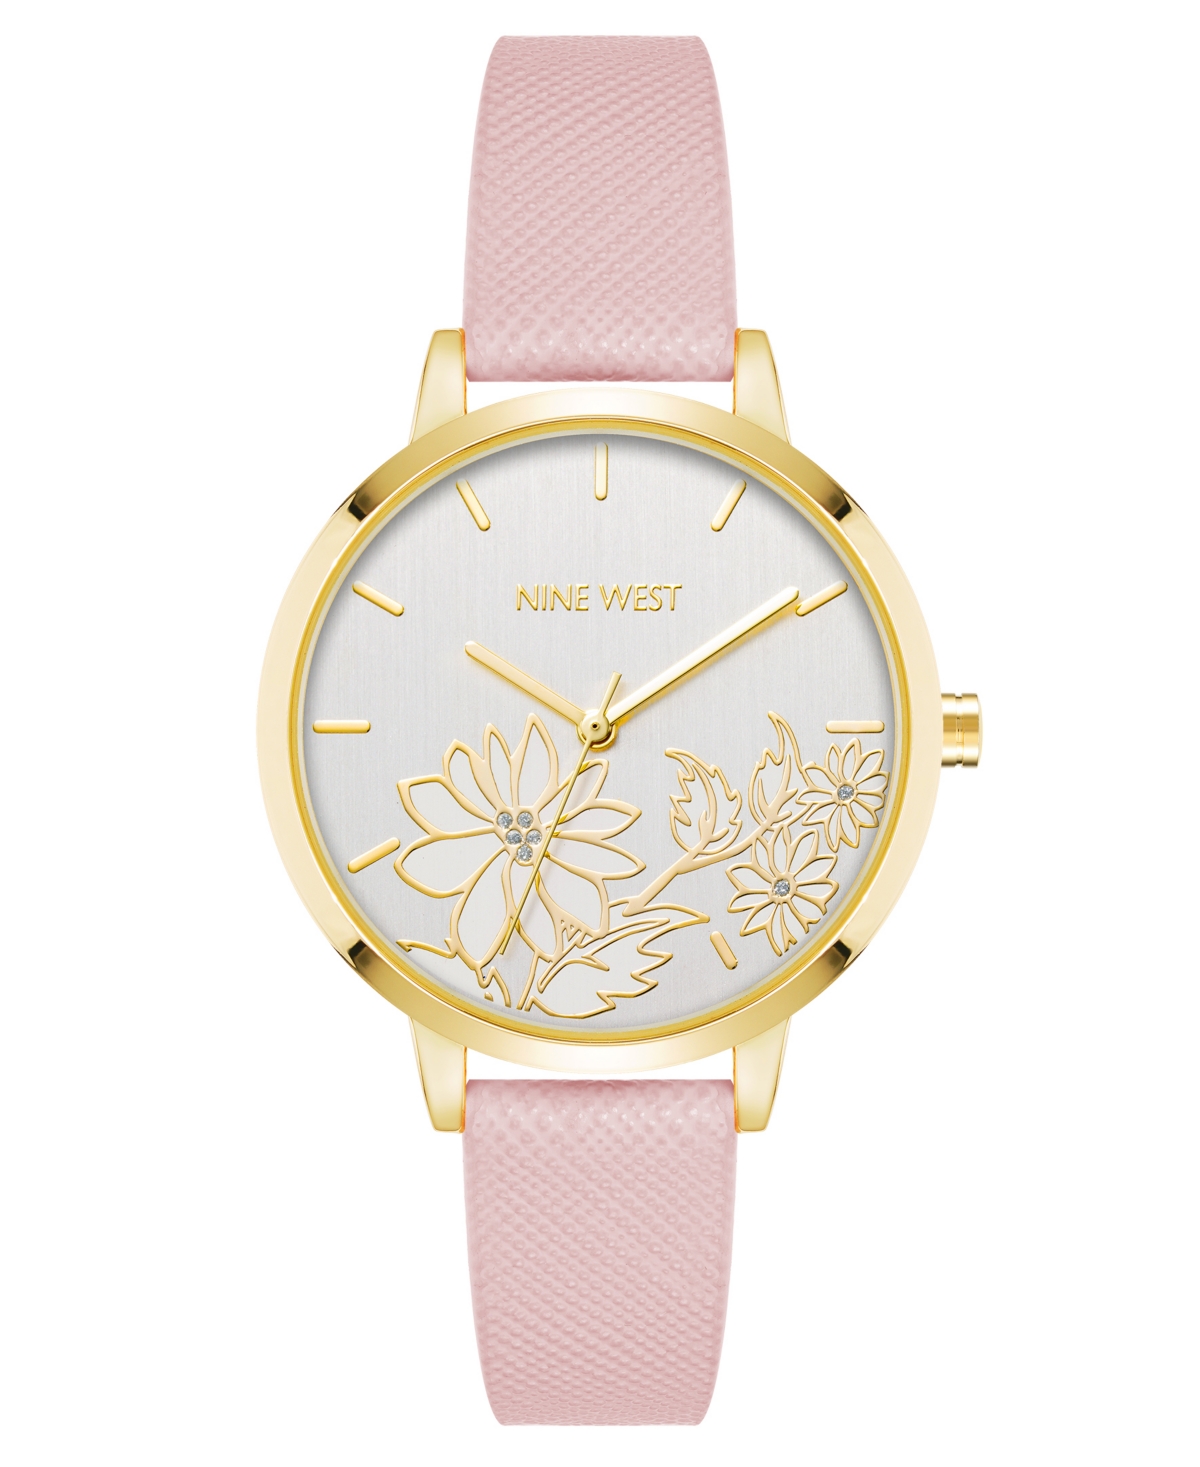 Nine West Woman's Quartz Pink Faux Leather Band And Floral Pattern Watch, 36mm In Pink,gold-tone